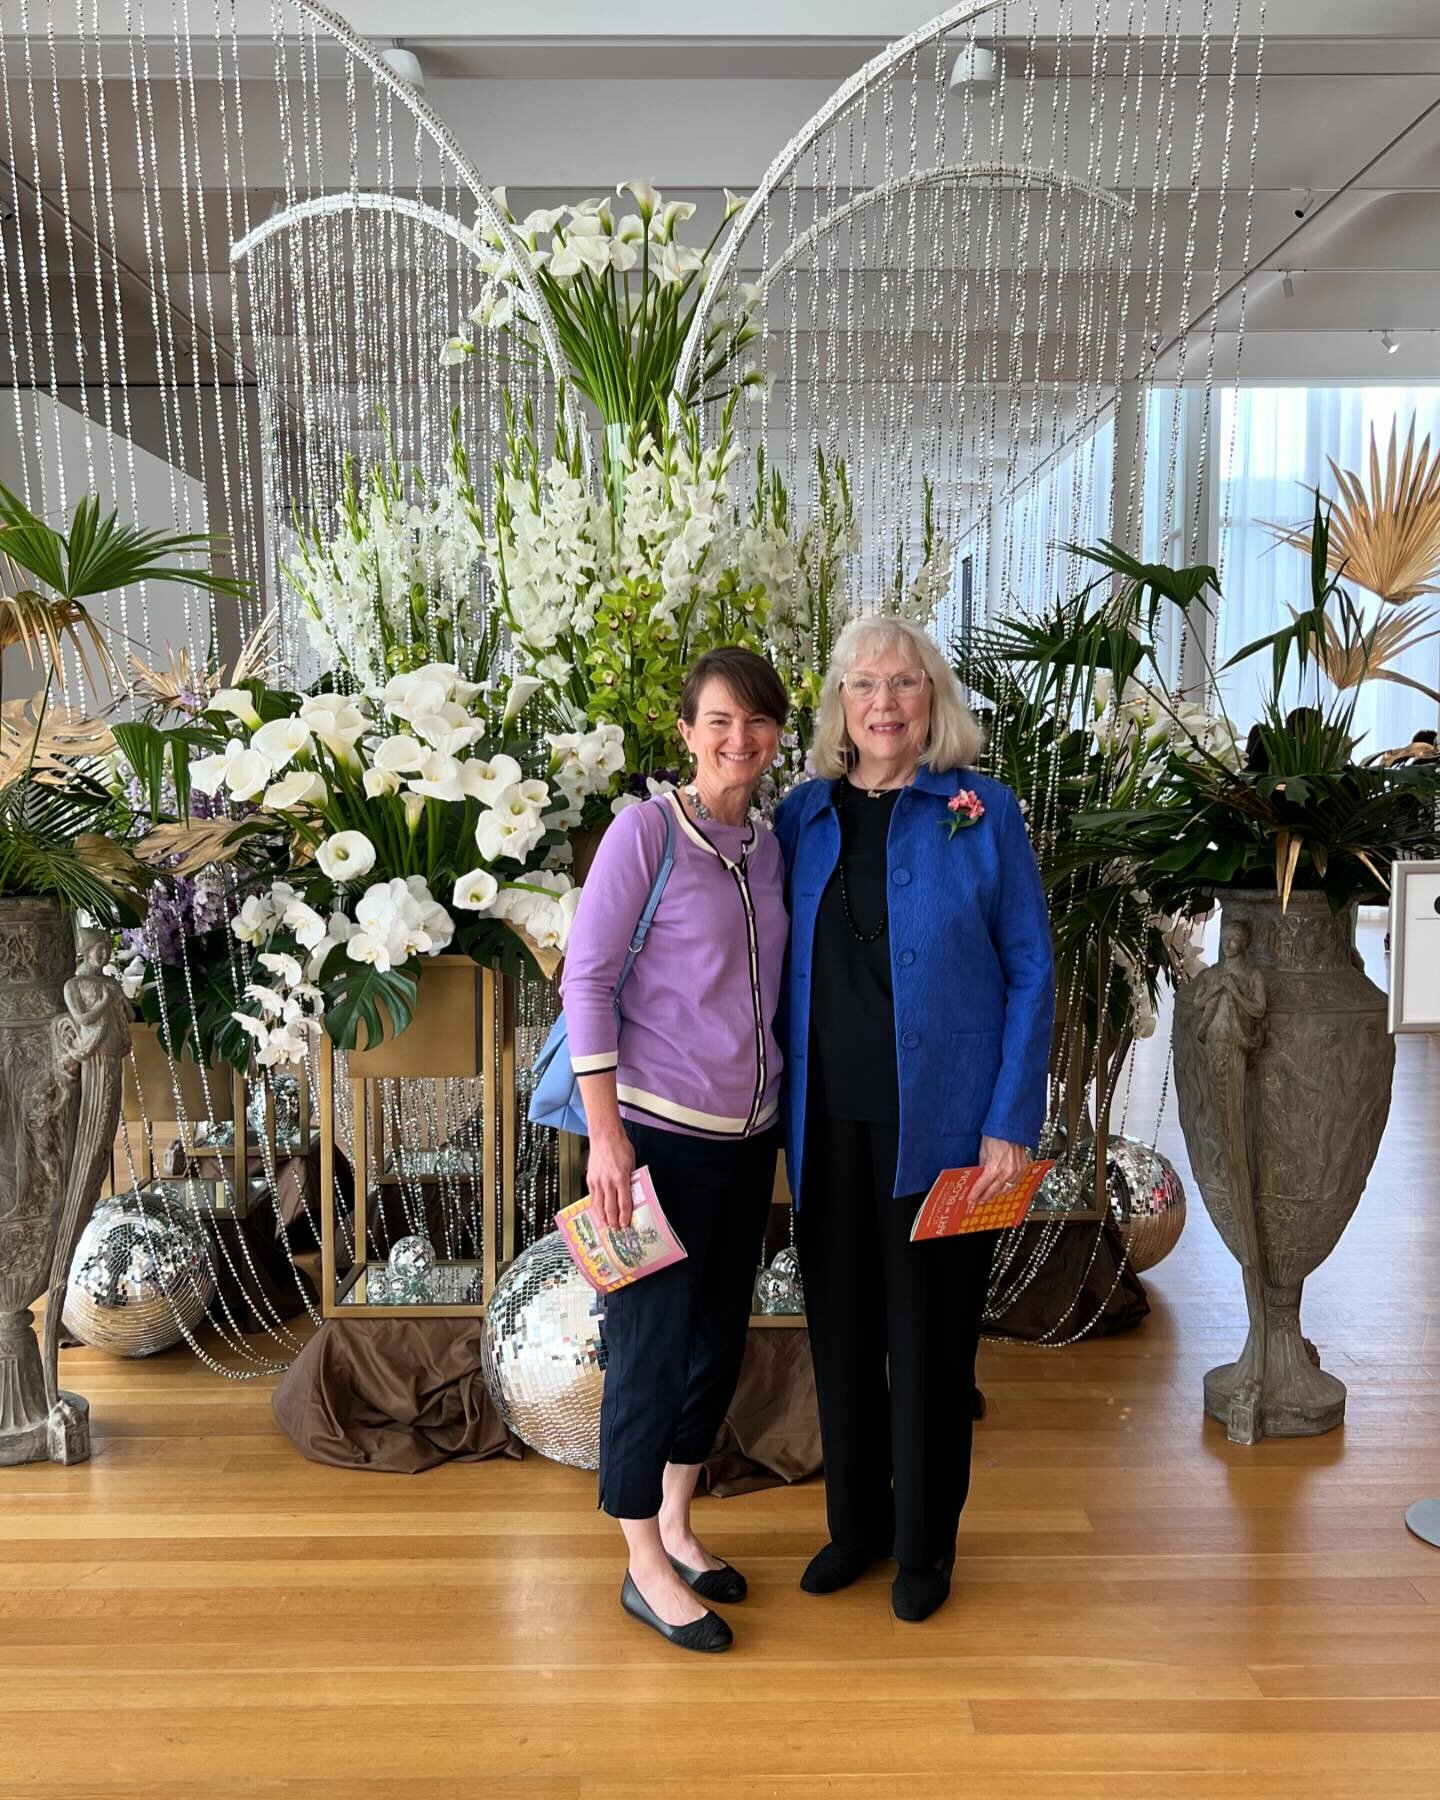 Did you go to Art in Bloom at the NC Museum of Art last week? I was pleasantly surprised to see the diversity of audience there - all ages, including many children!

I got to go with my Mother in law who worked in a floral shop in her high school day